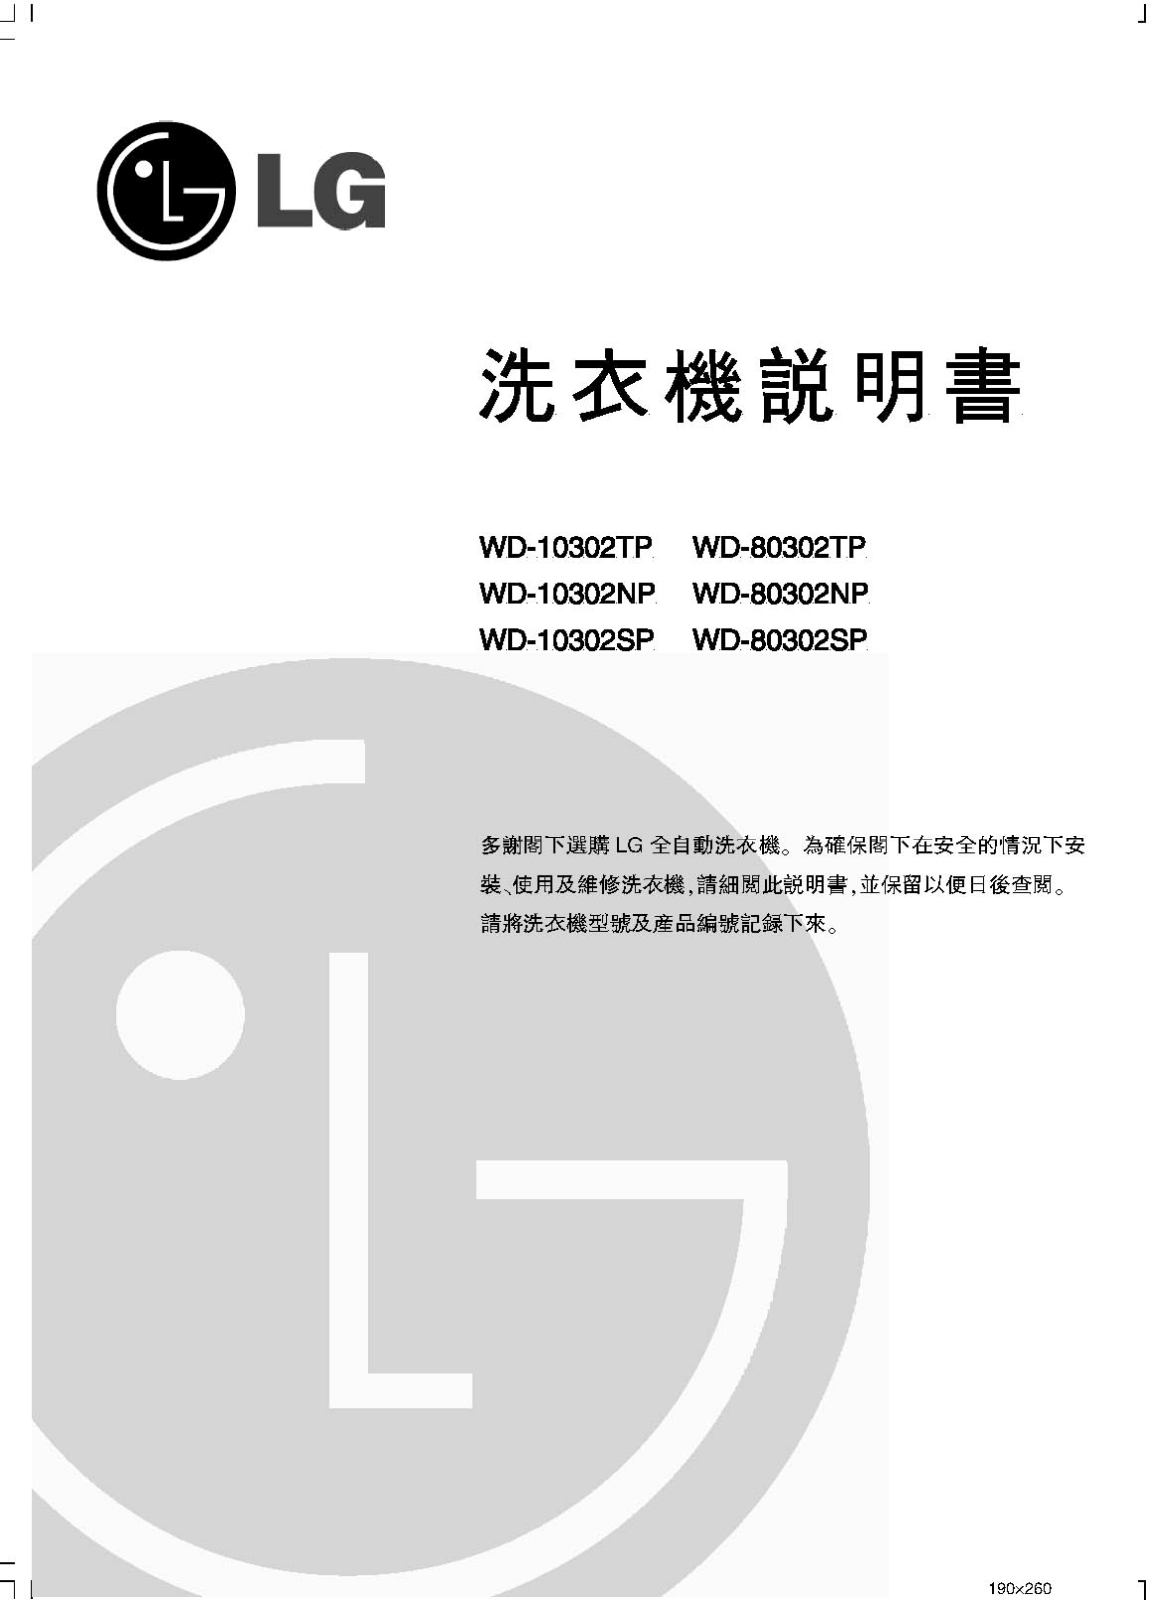 Lg WD-10302NP, WD-80302TP, WD-10302SP, WD-80302SP, WD-10302TP User Manual